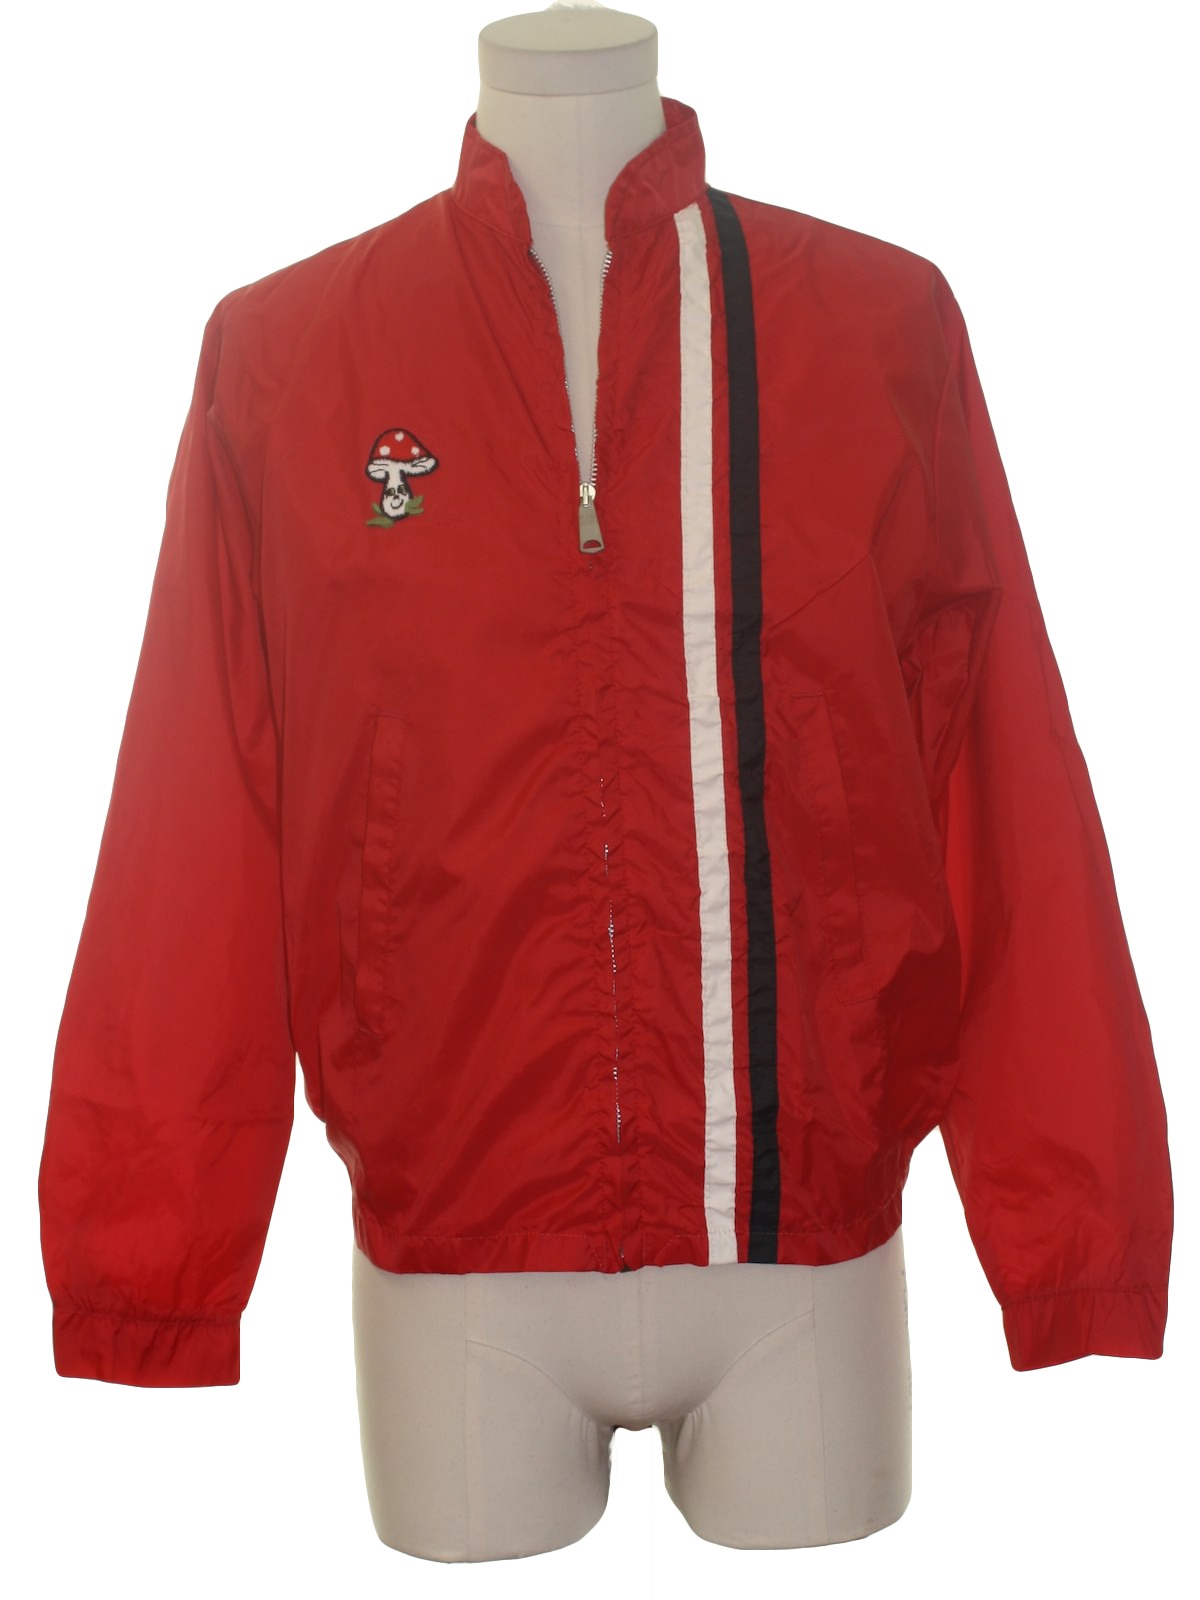 60's Vintage Jacket: 60s -Louisville Sportswear- Unisex red, white and  black nylon windbreaker style racing jacket. Stripes down the left front,  an appliqued cute mushroom patch on the right chest, lower inset